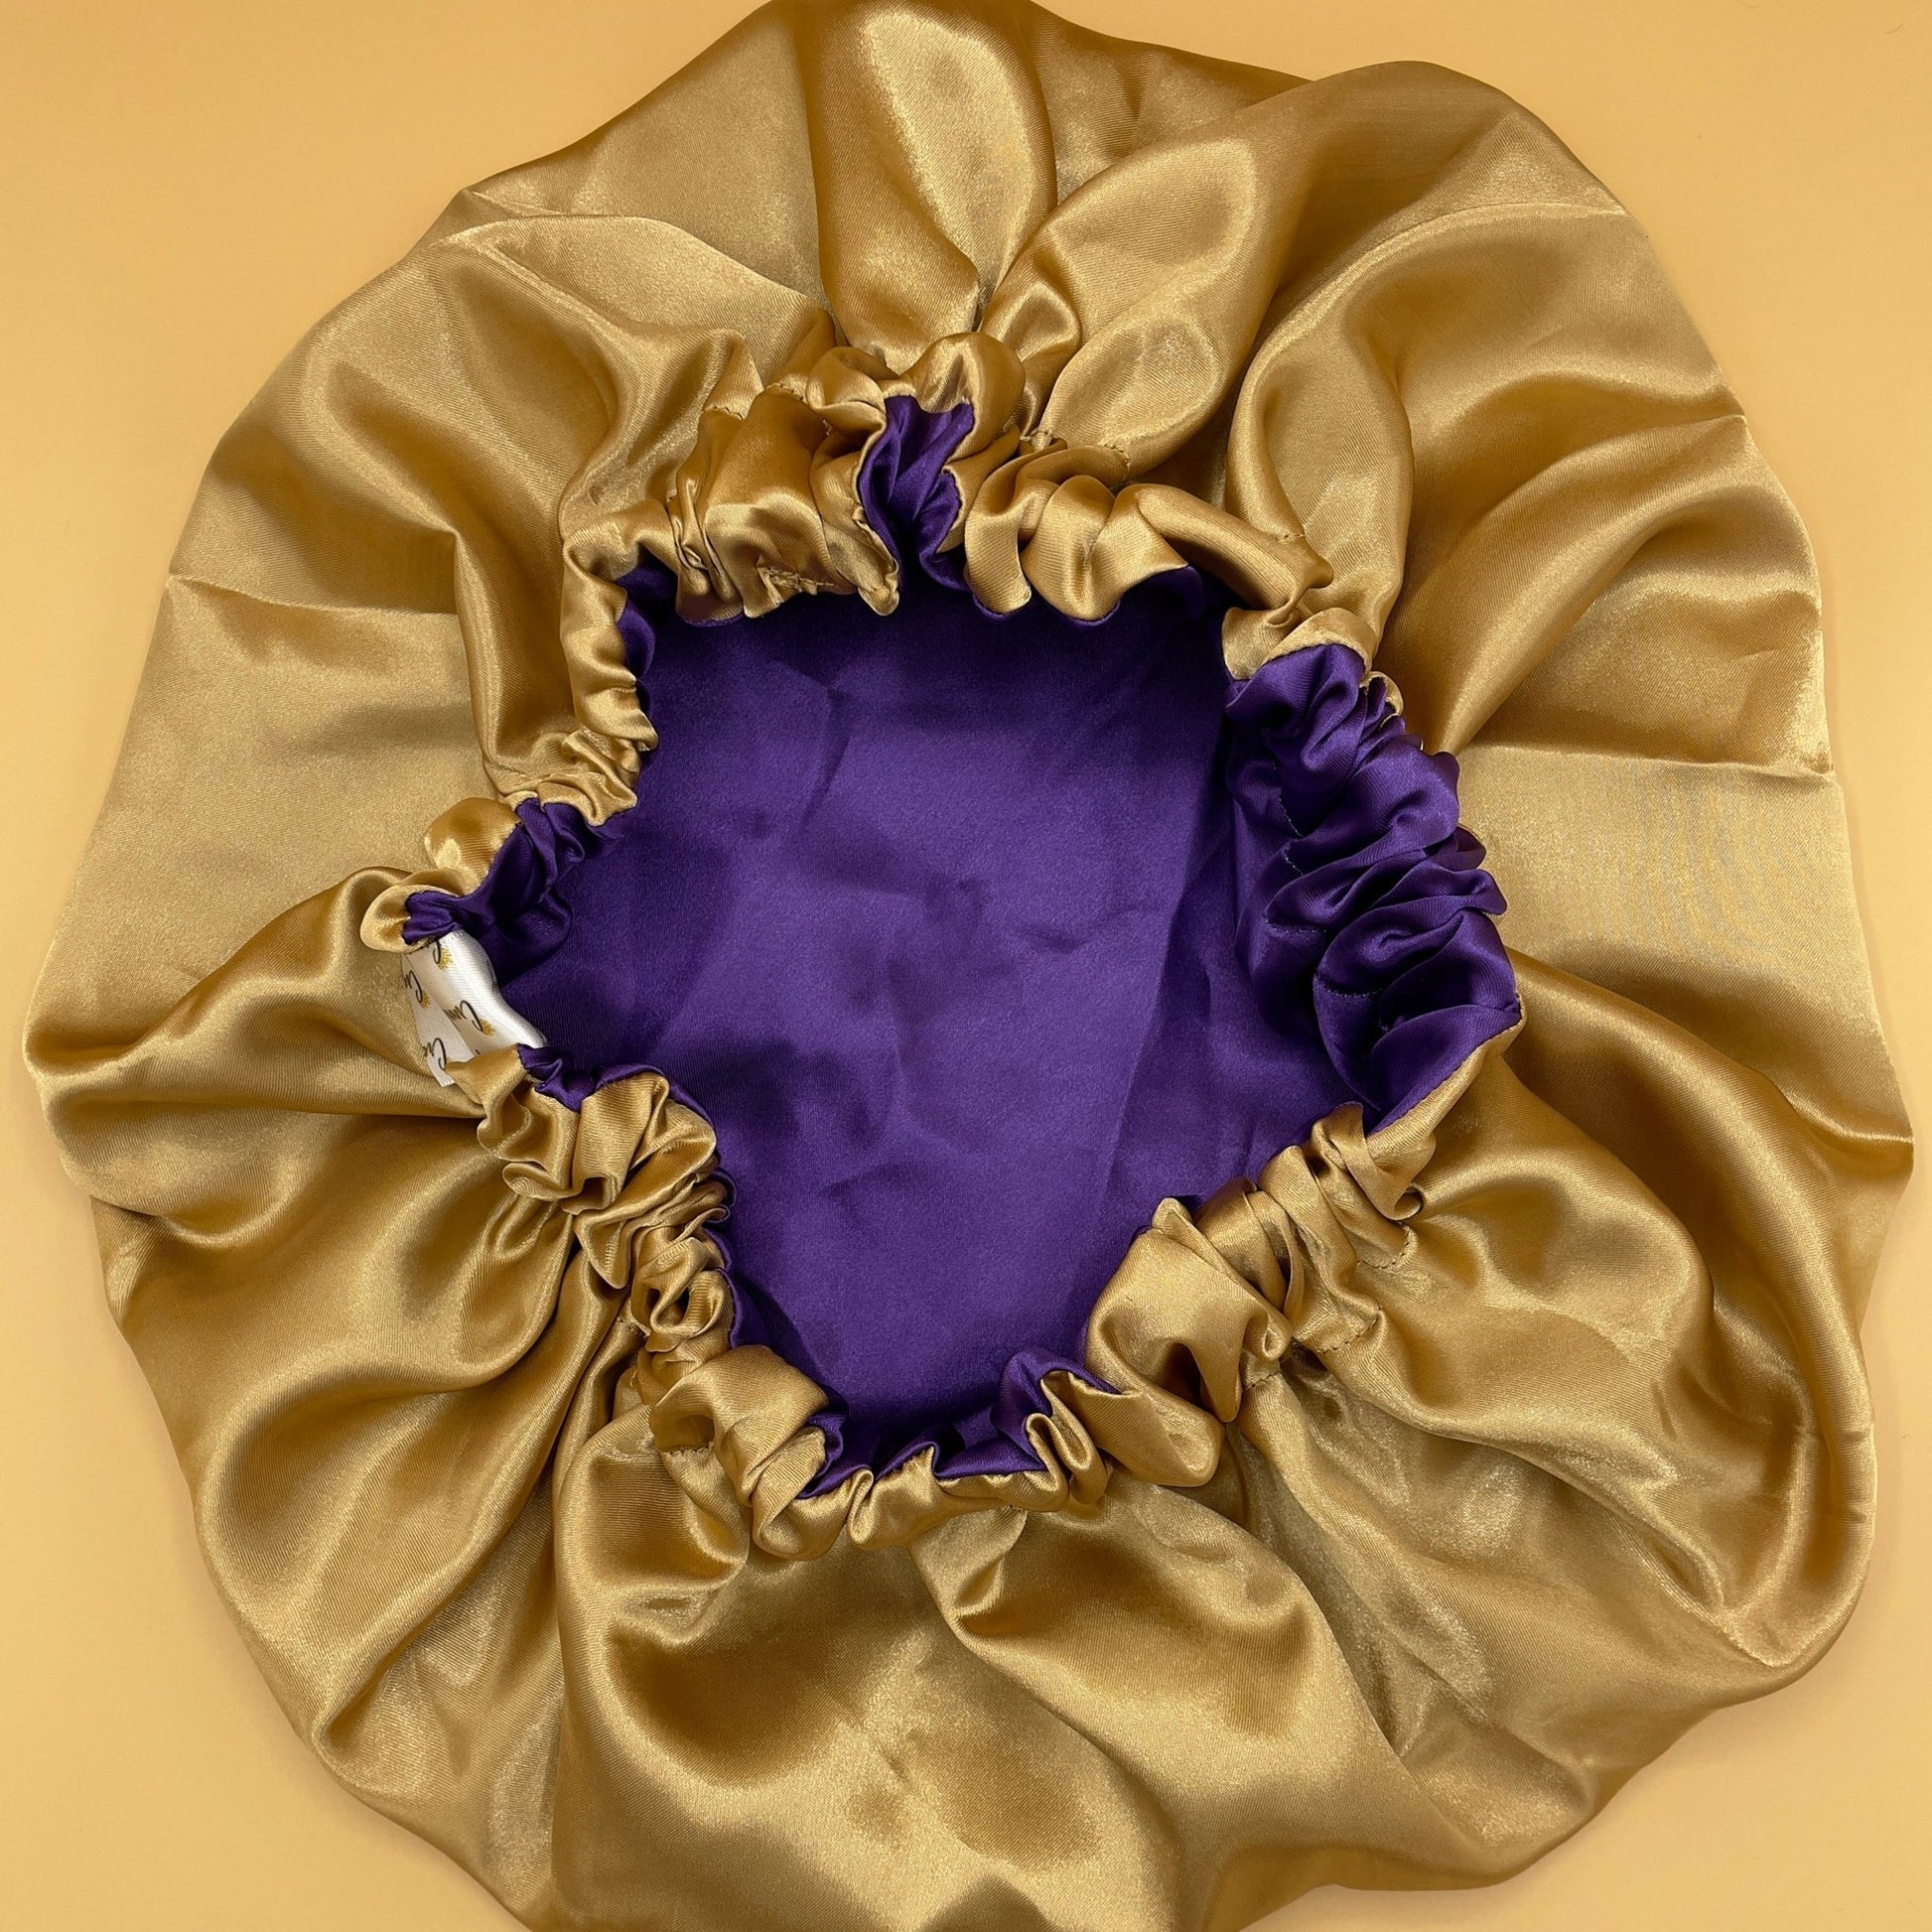 Everything Purple - Reversible Satin Bonnet - Crowned by RoyaltyAdults